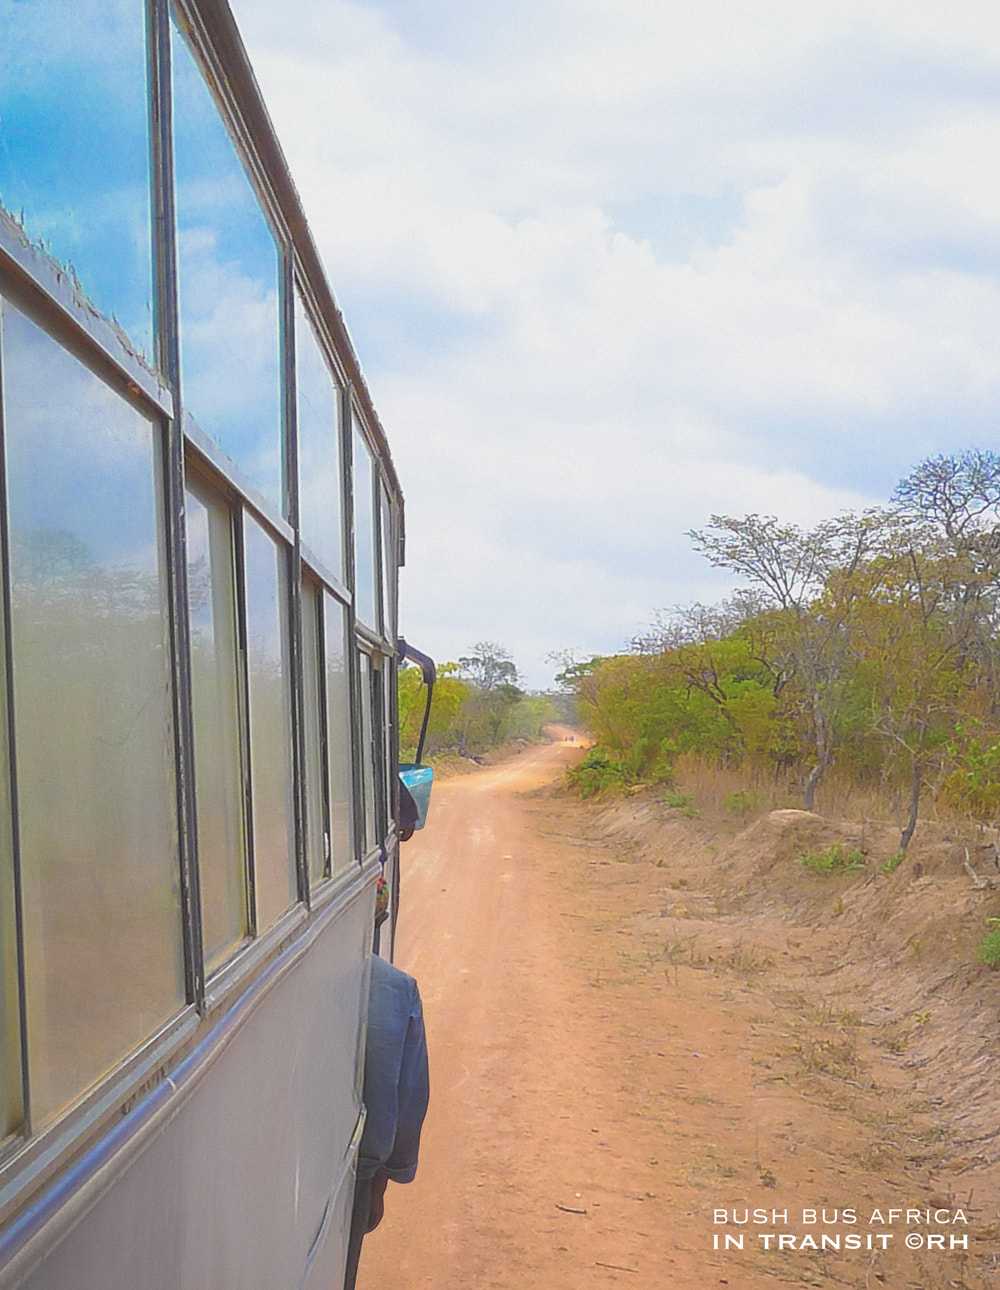 solo overland travel and transit, no frills journey Africa, image by Rick Hemi